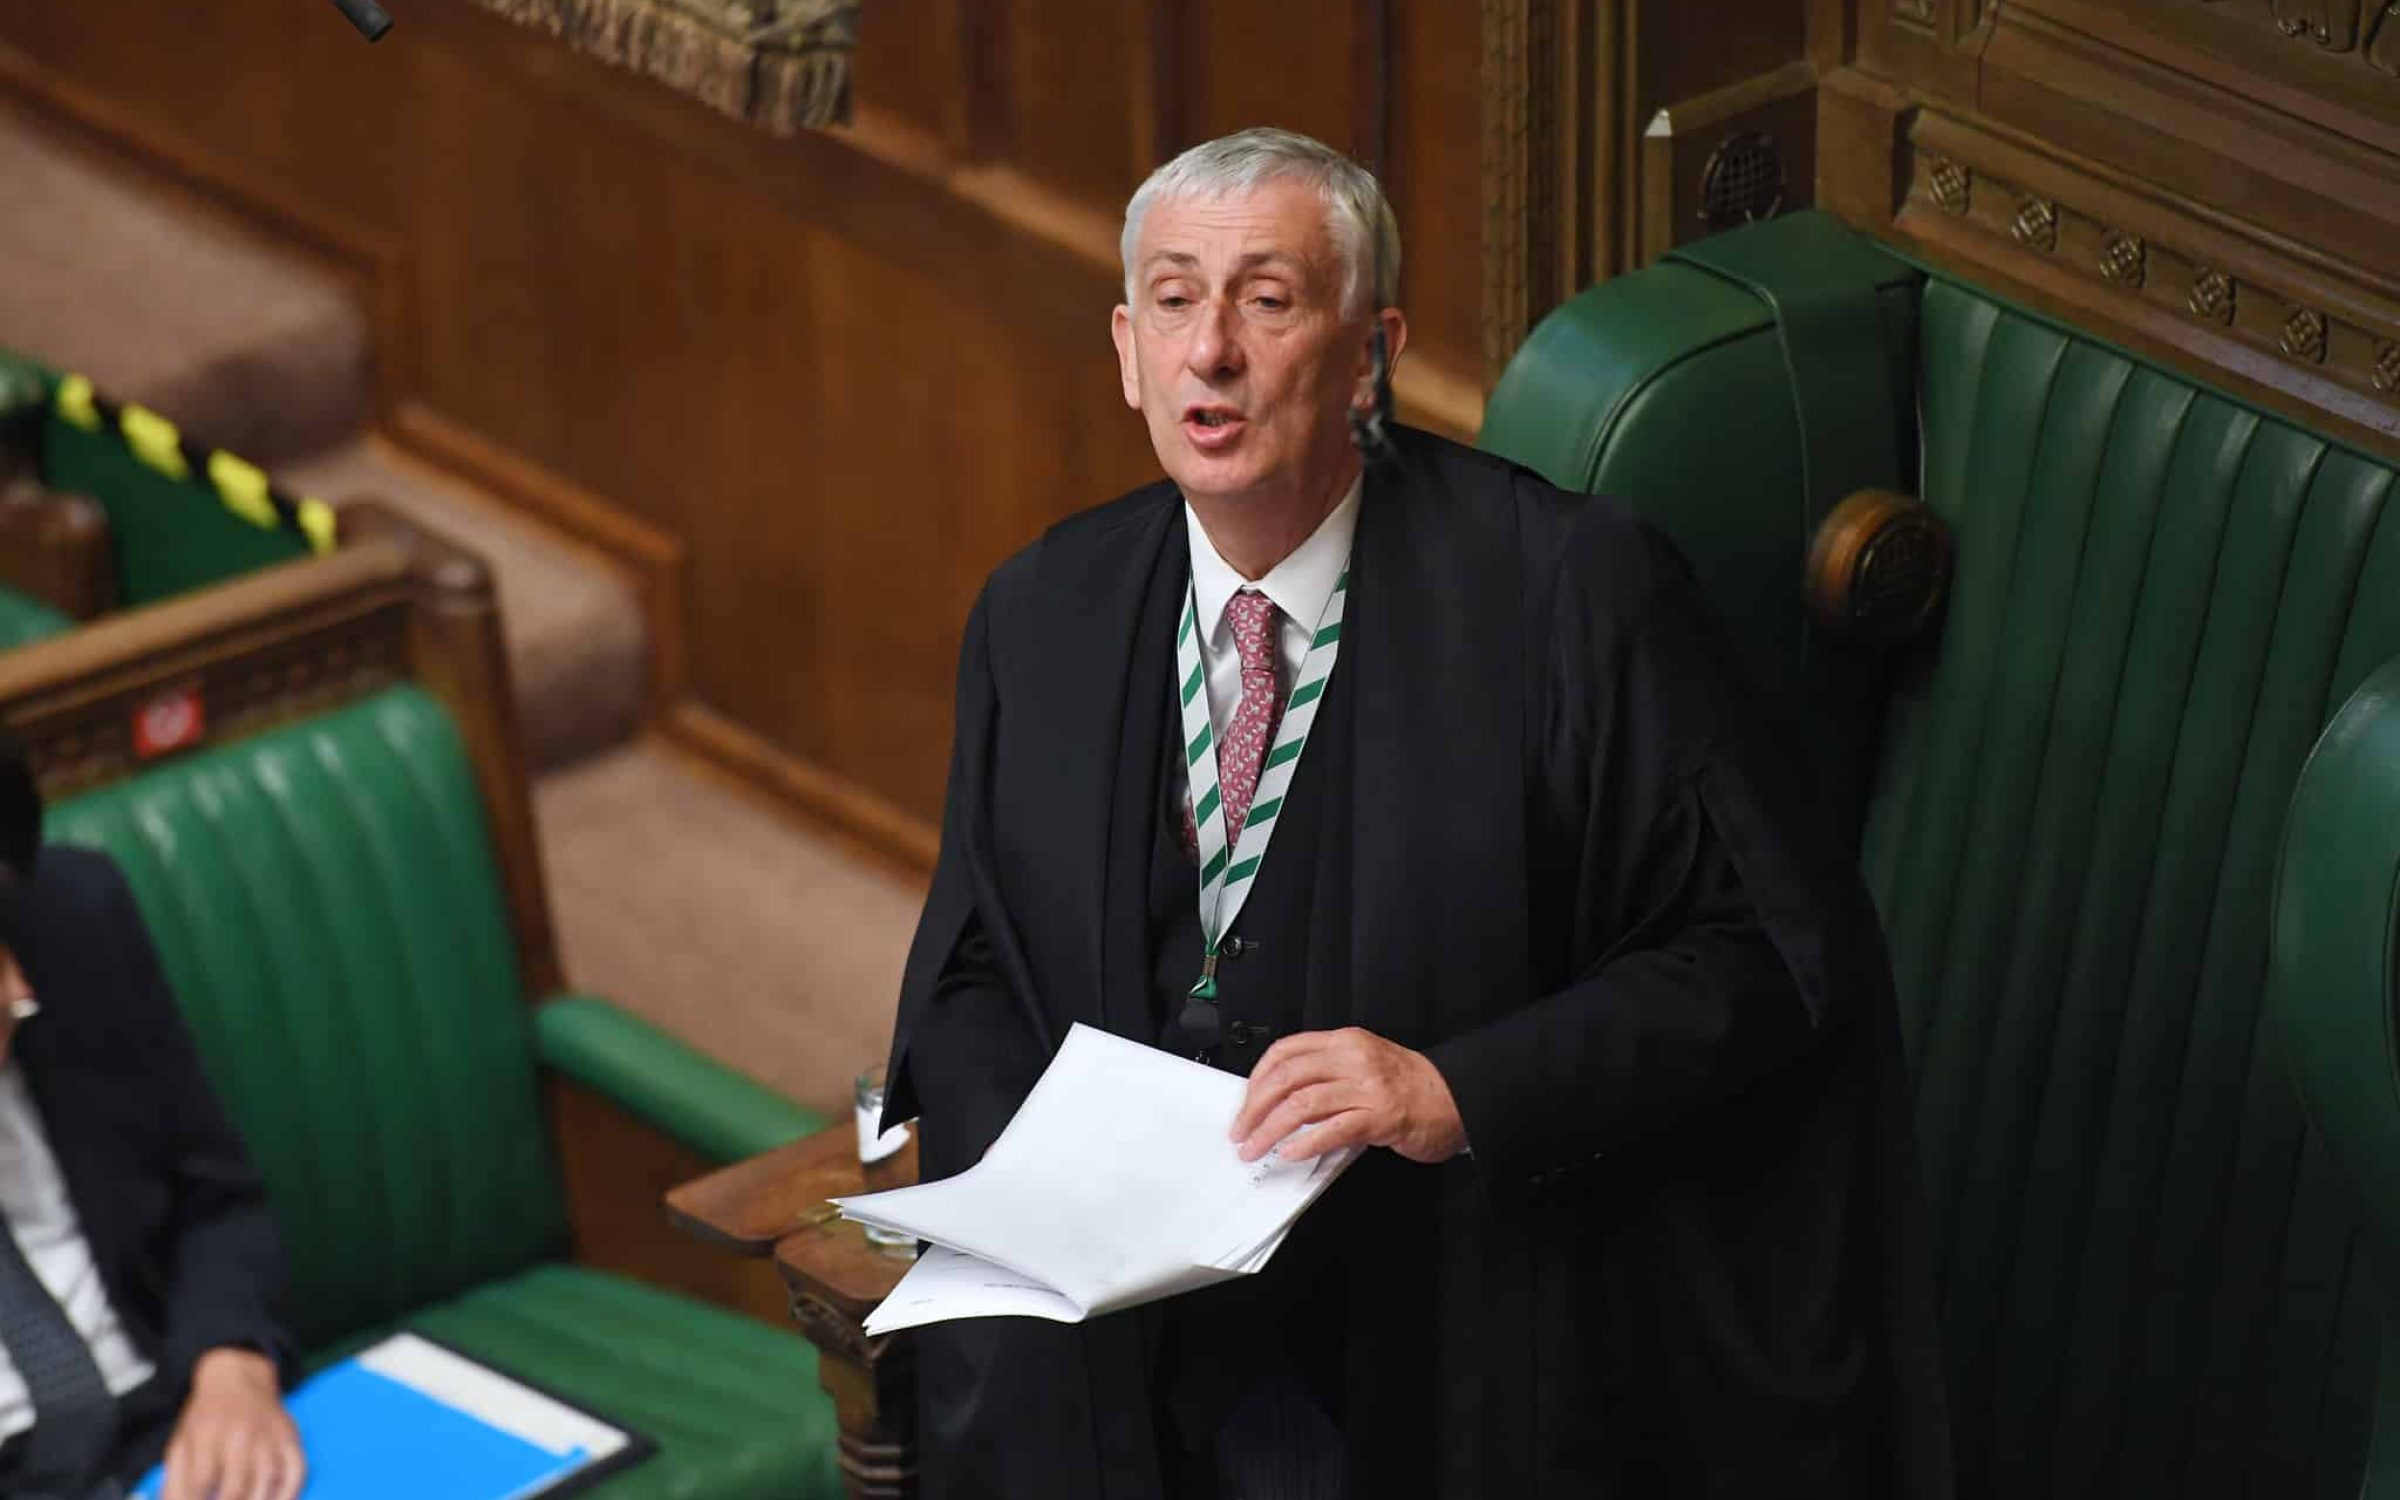 Sir Lindsay Hoyle, Speaker of the House of Commons, who broke parliamentary convention to protect safety of Labour MPs ( via UK Parliament / Jessica Taylor)